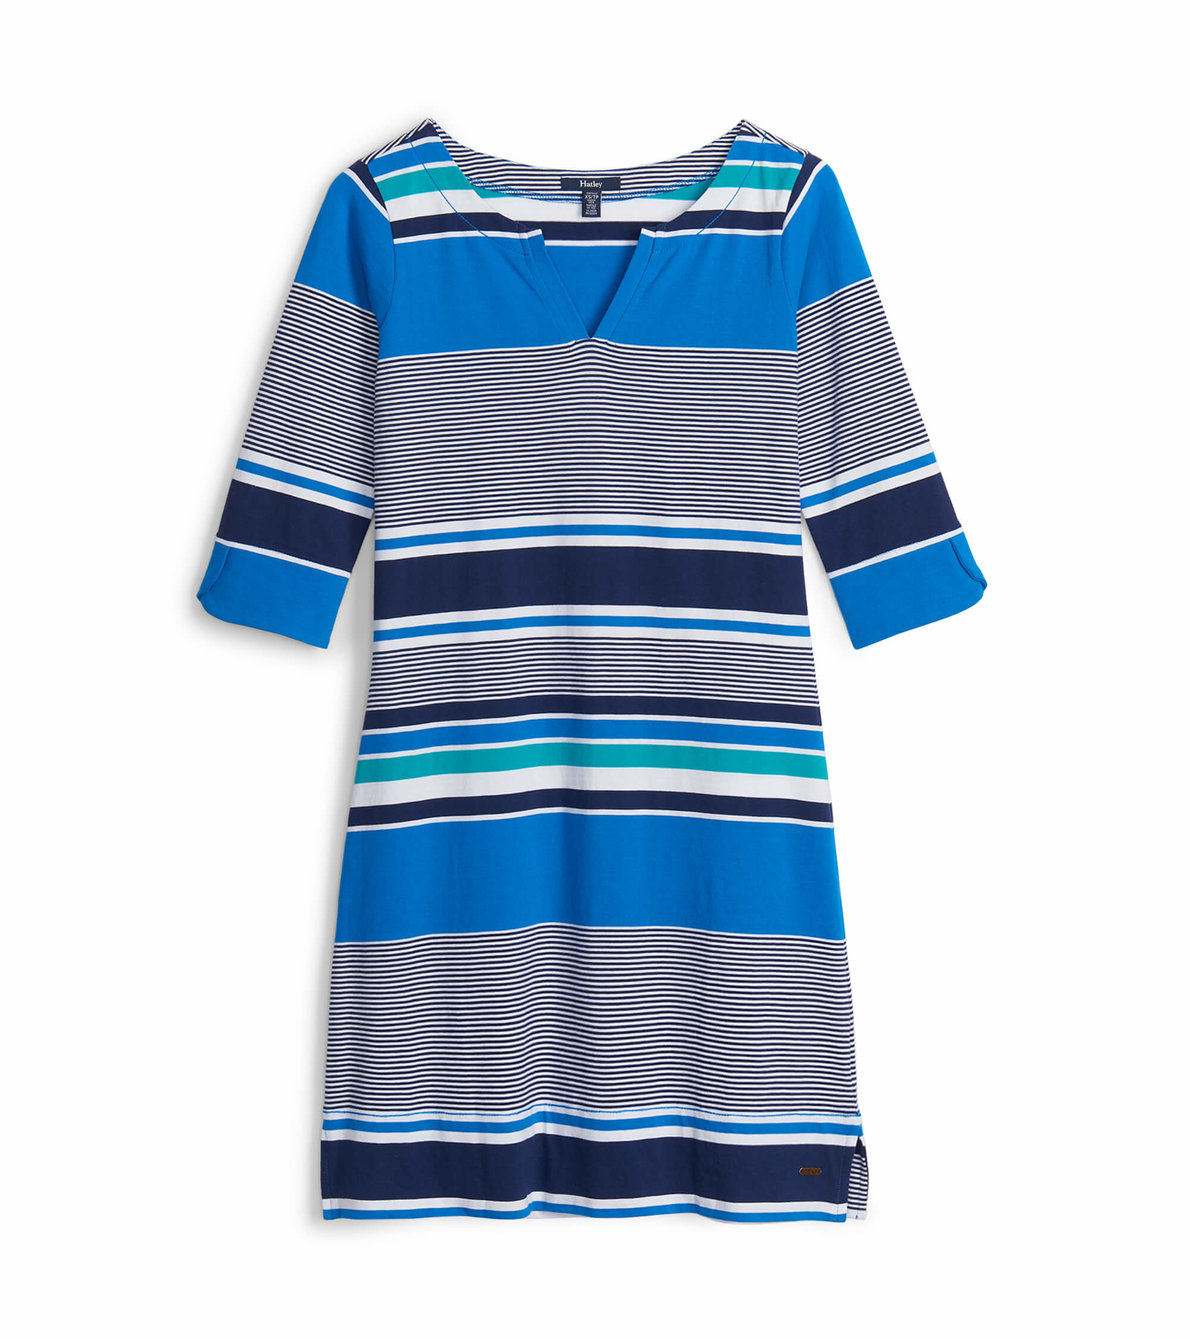 View larger image of Lucy Dress - Gardenside Stripes Length Options